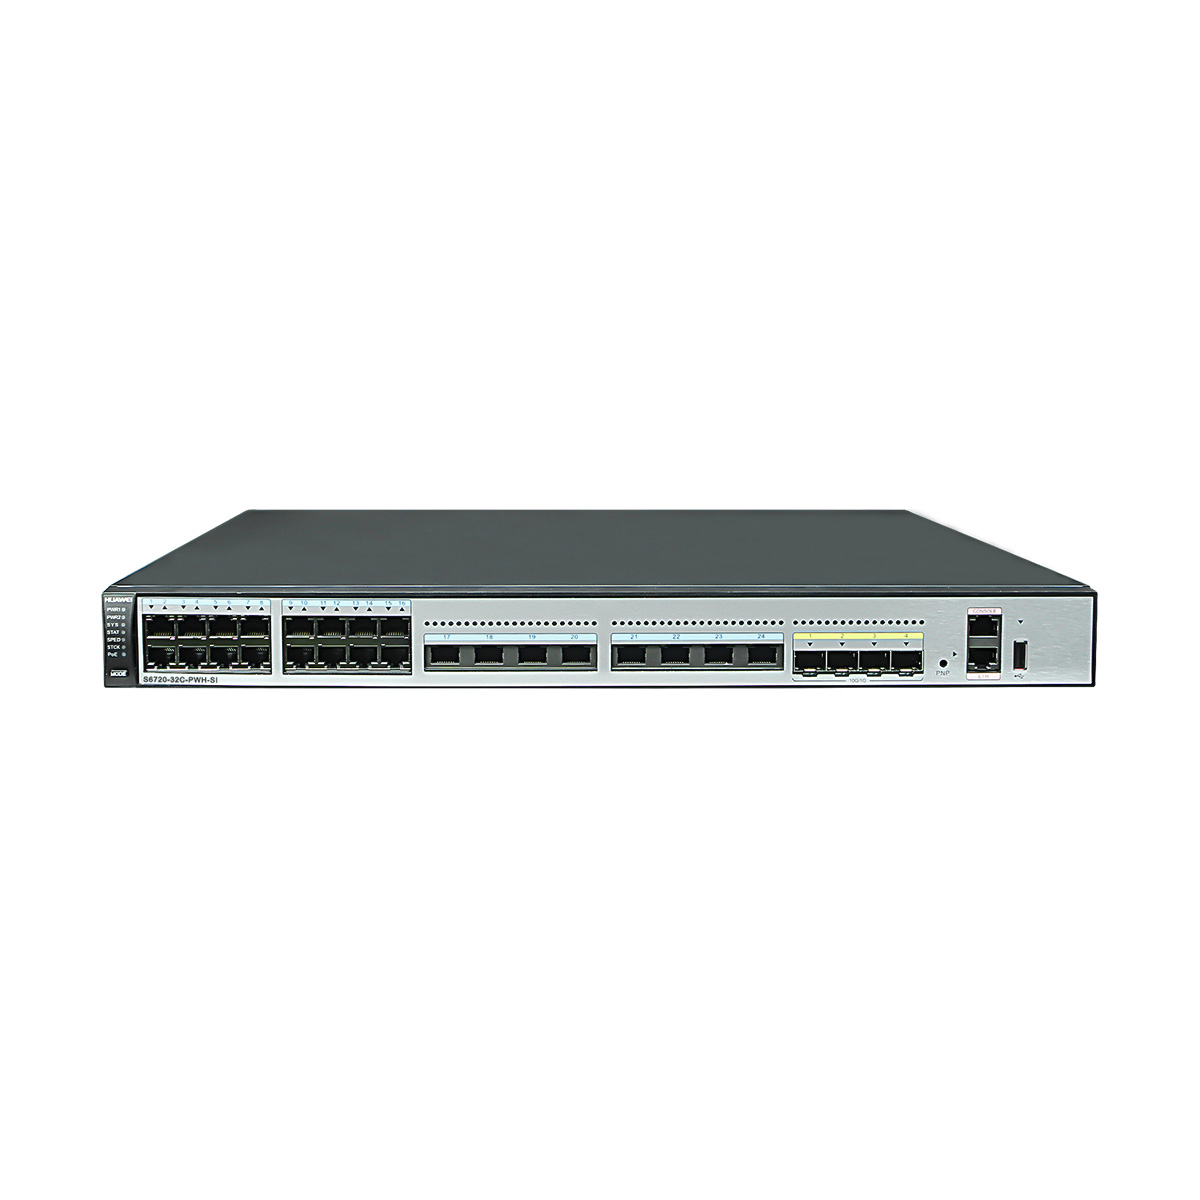 S6720-32C-PWH-SI-AC Best Price At Huawei Authorized Partner Telecomate.com